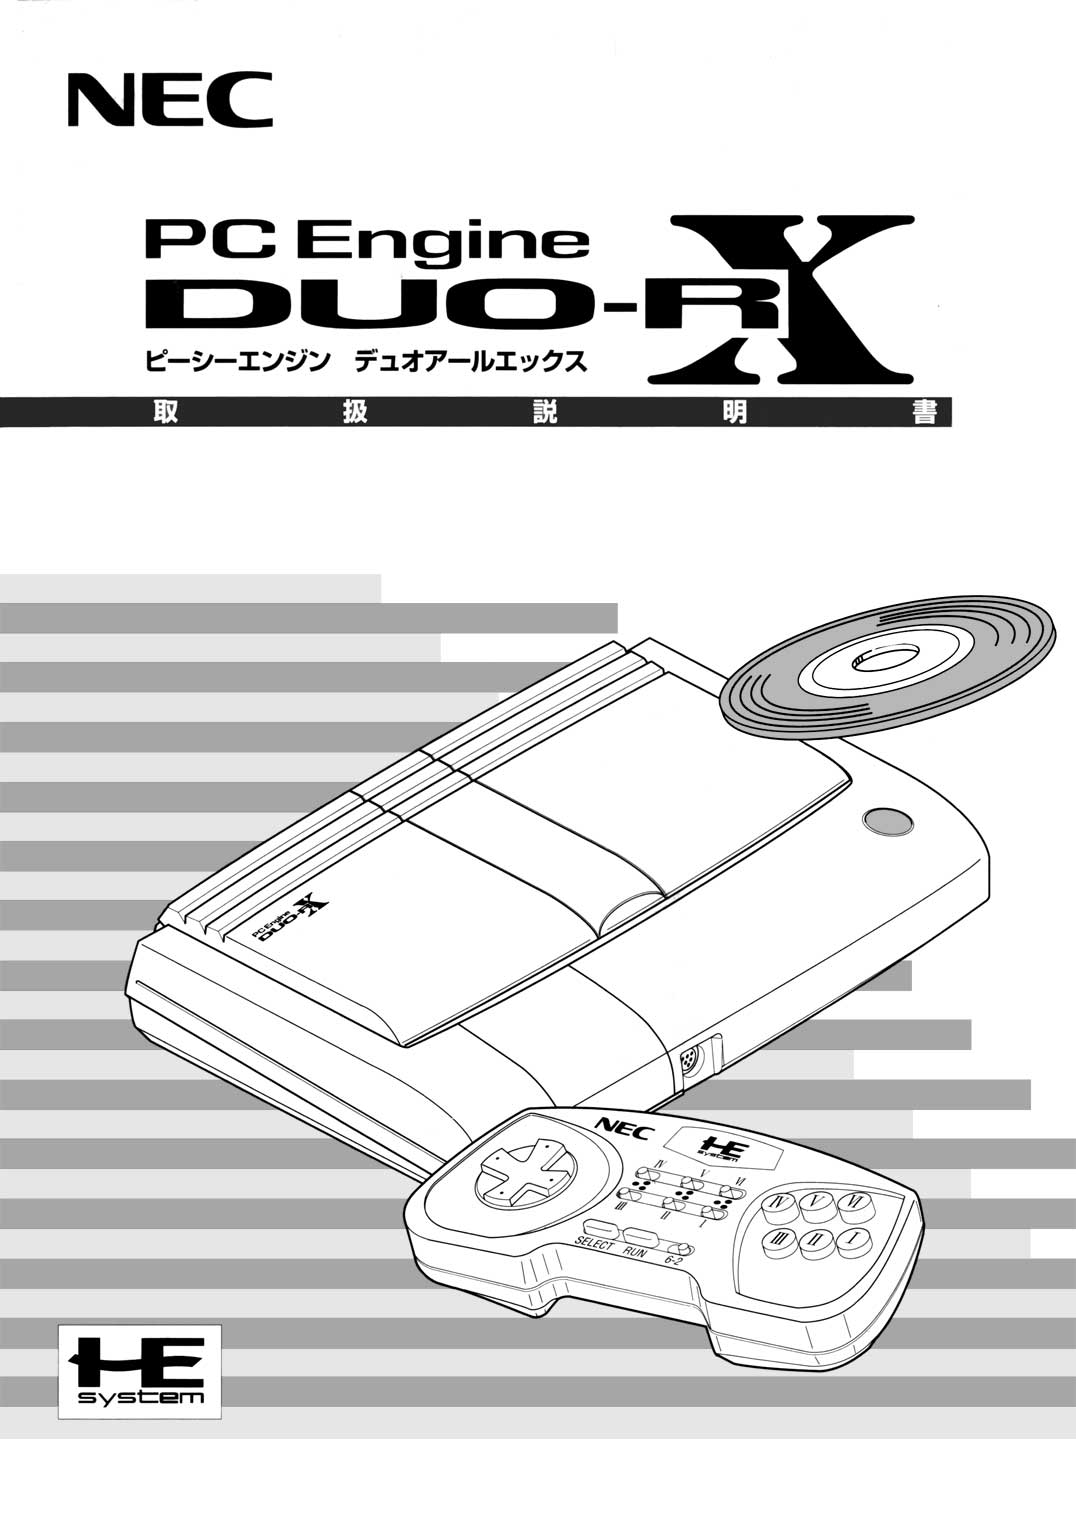 Duo-RX Manual - The PC Engine Software Bible